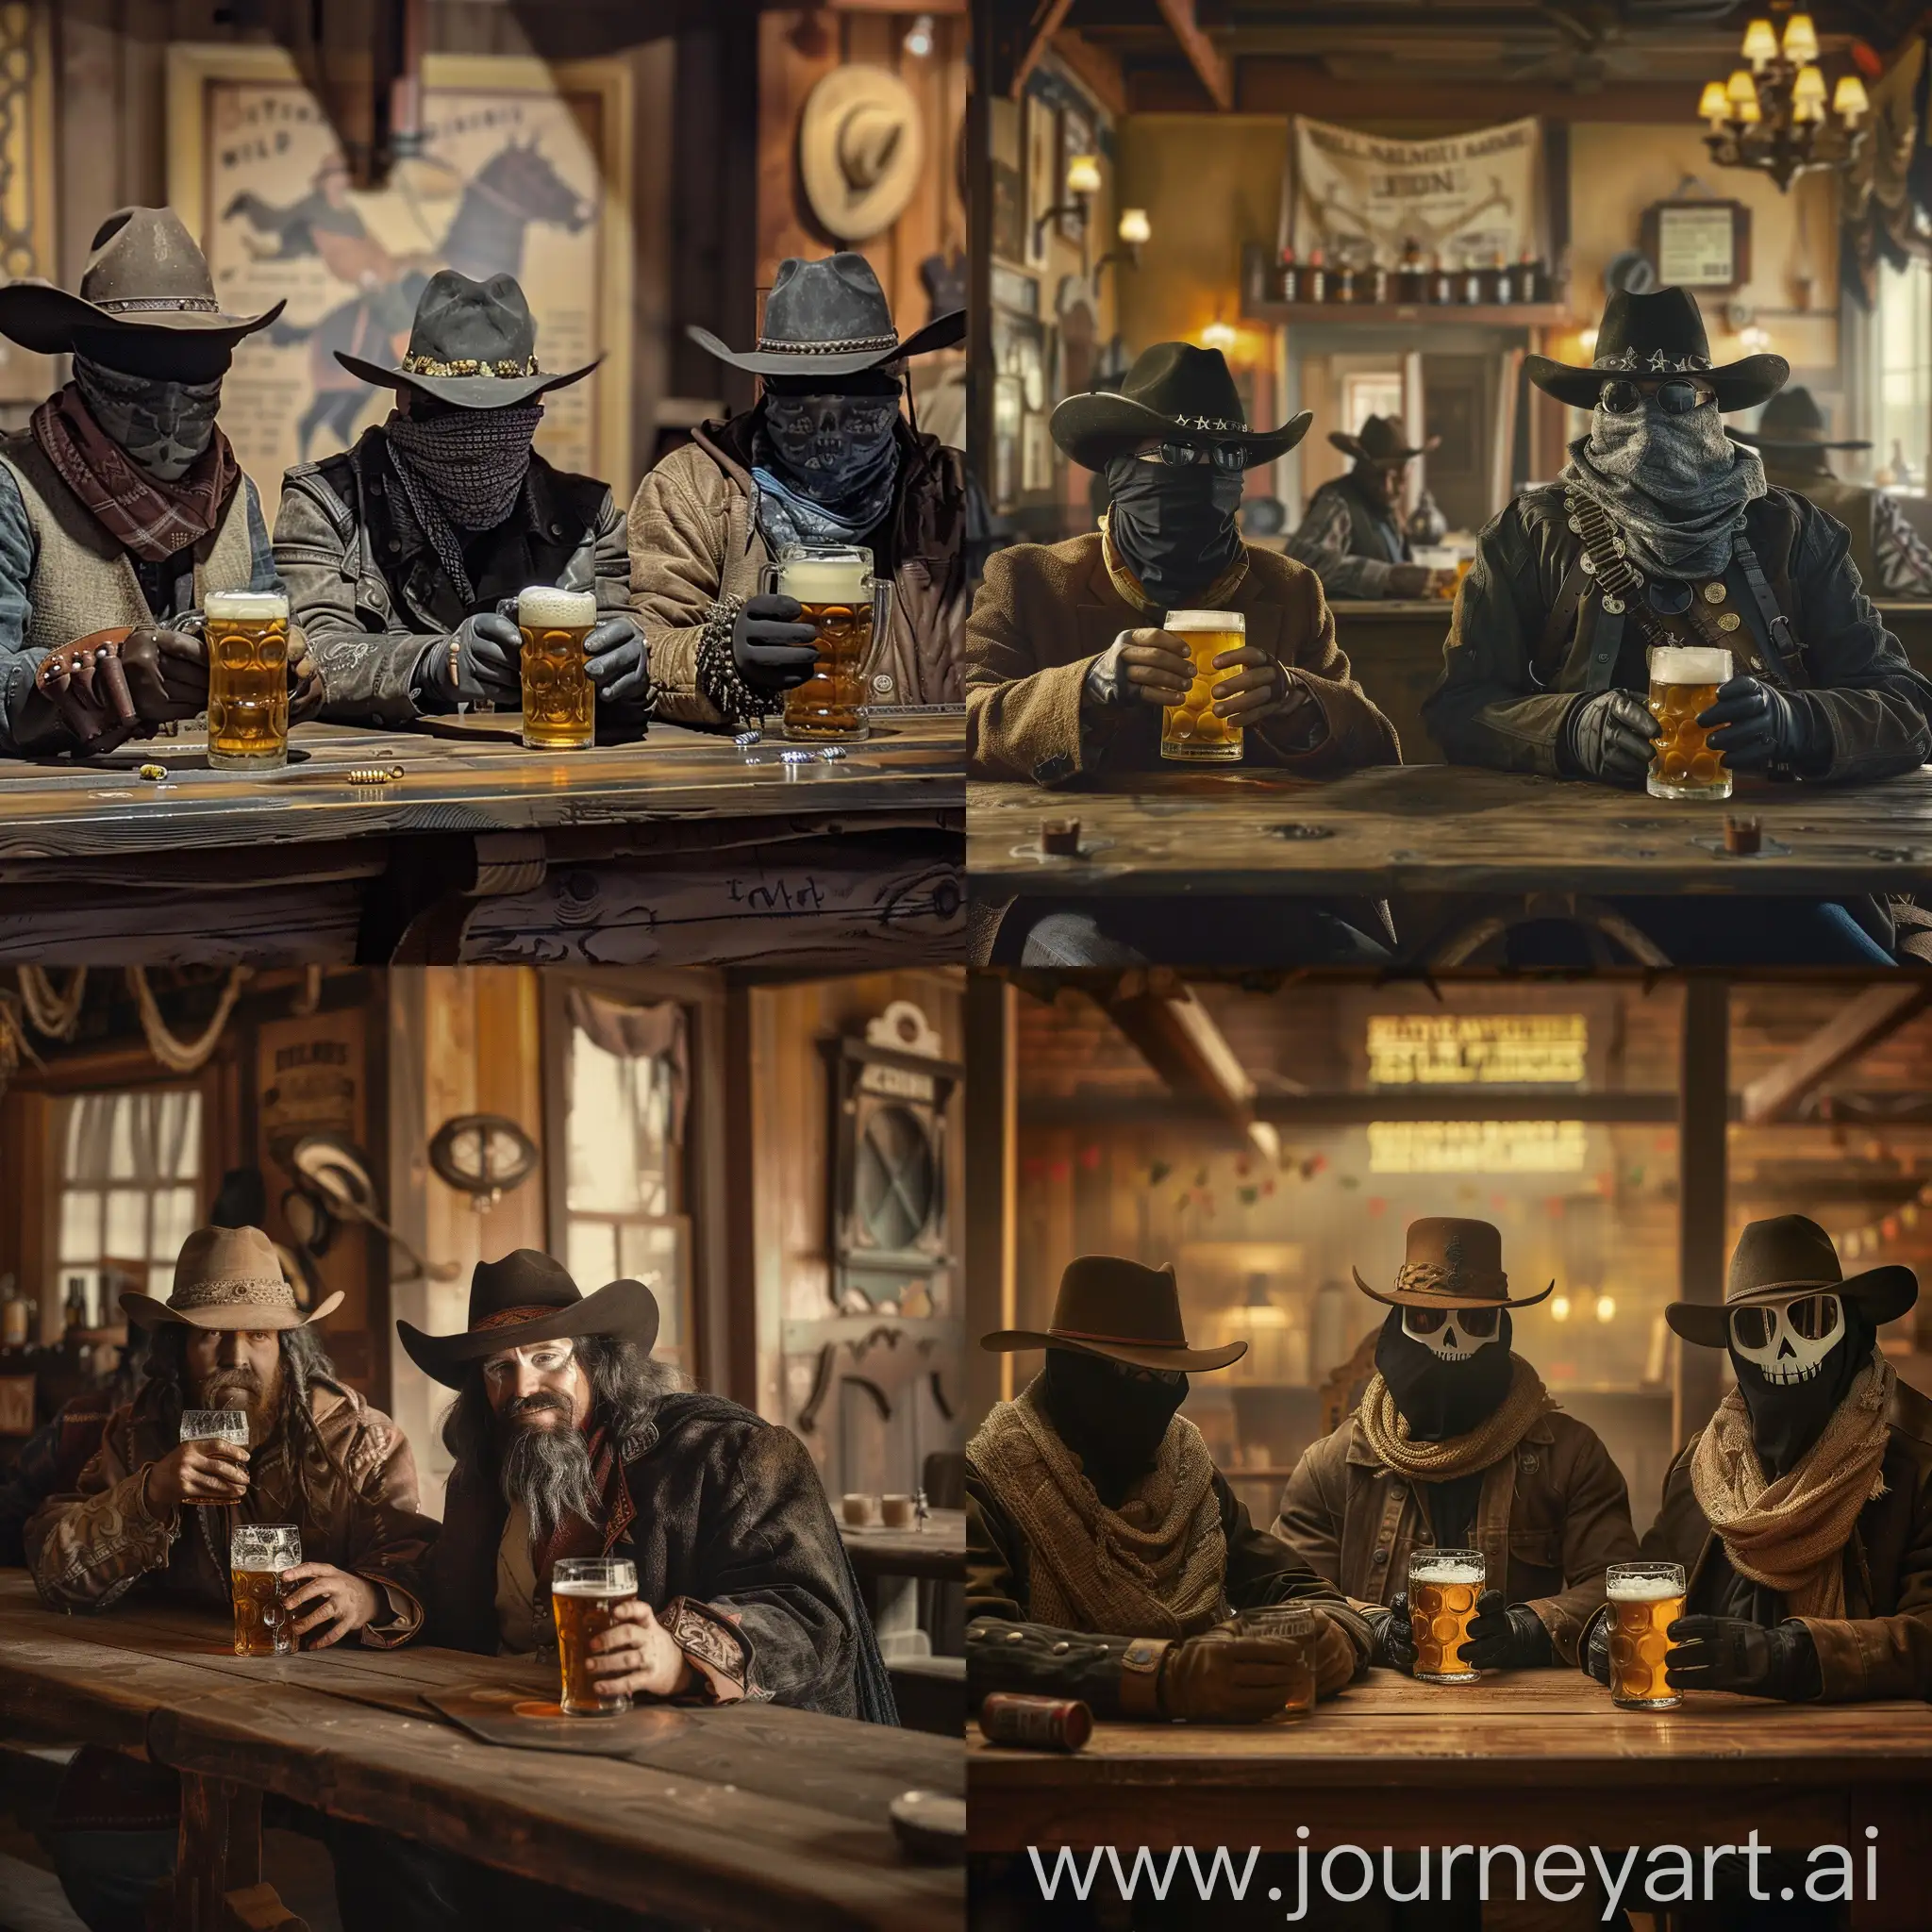 A real image of real Binary Bandits drinking beer in a Wild West saloon